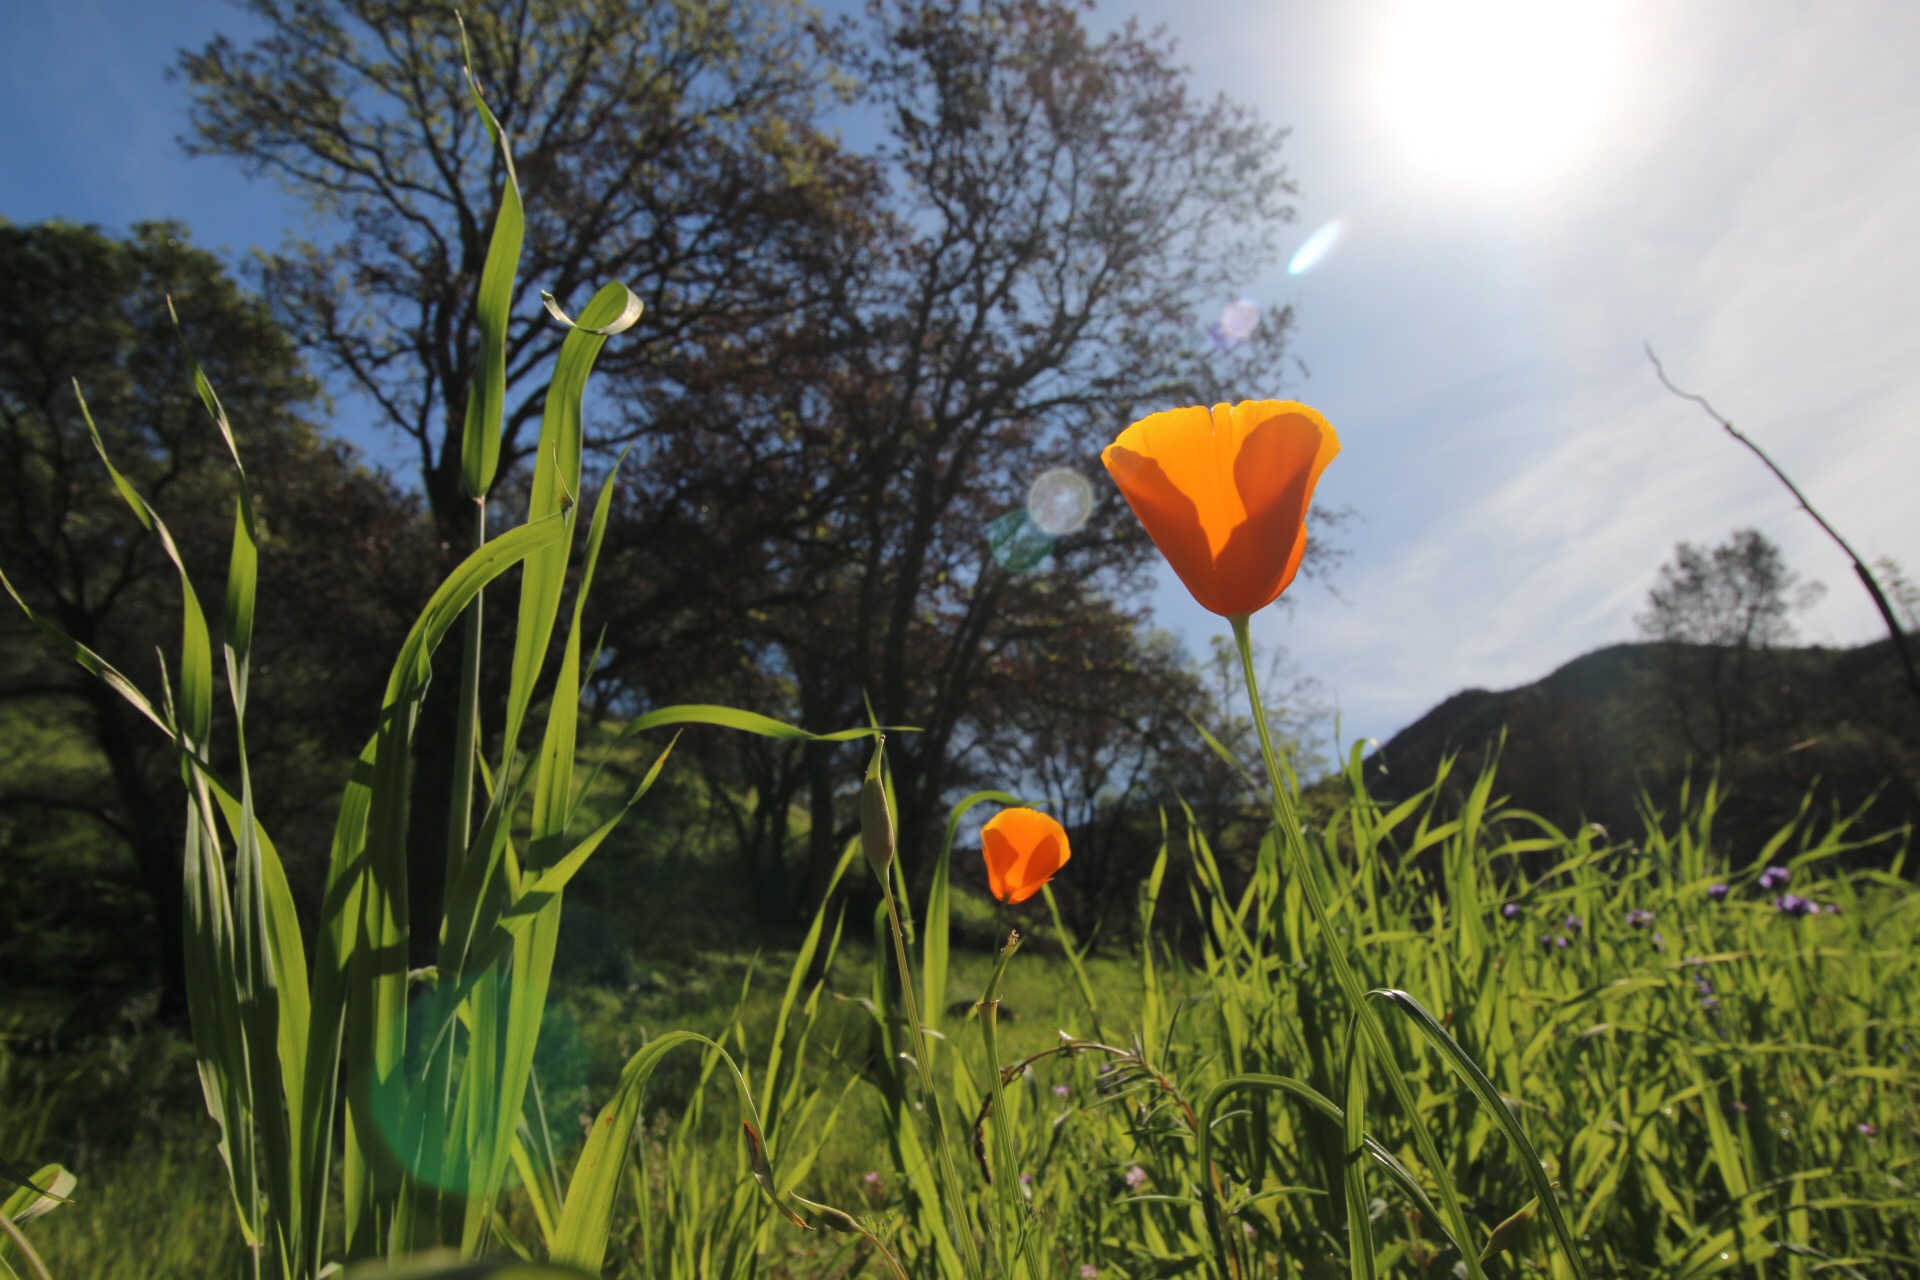 California Poppy in a grass field with trees in the background